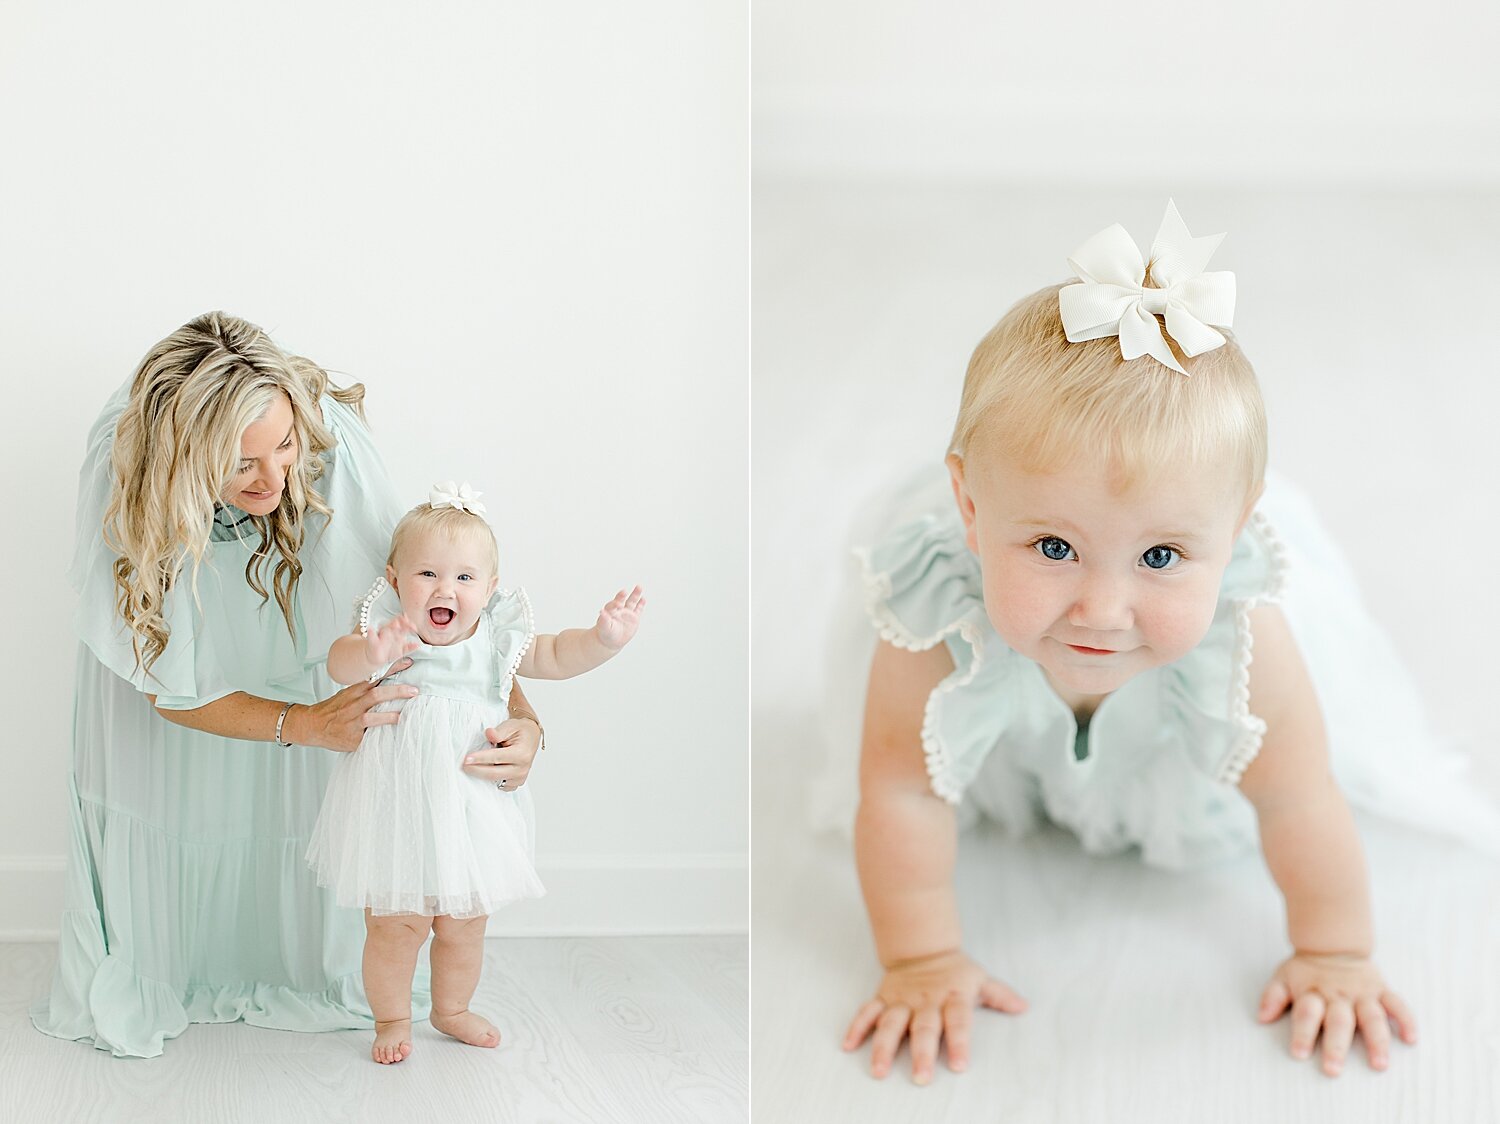 Mom and daughter in studio for photos at eight months old. Photos by Kristin Wood Photography.